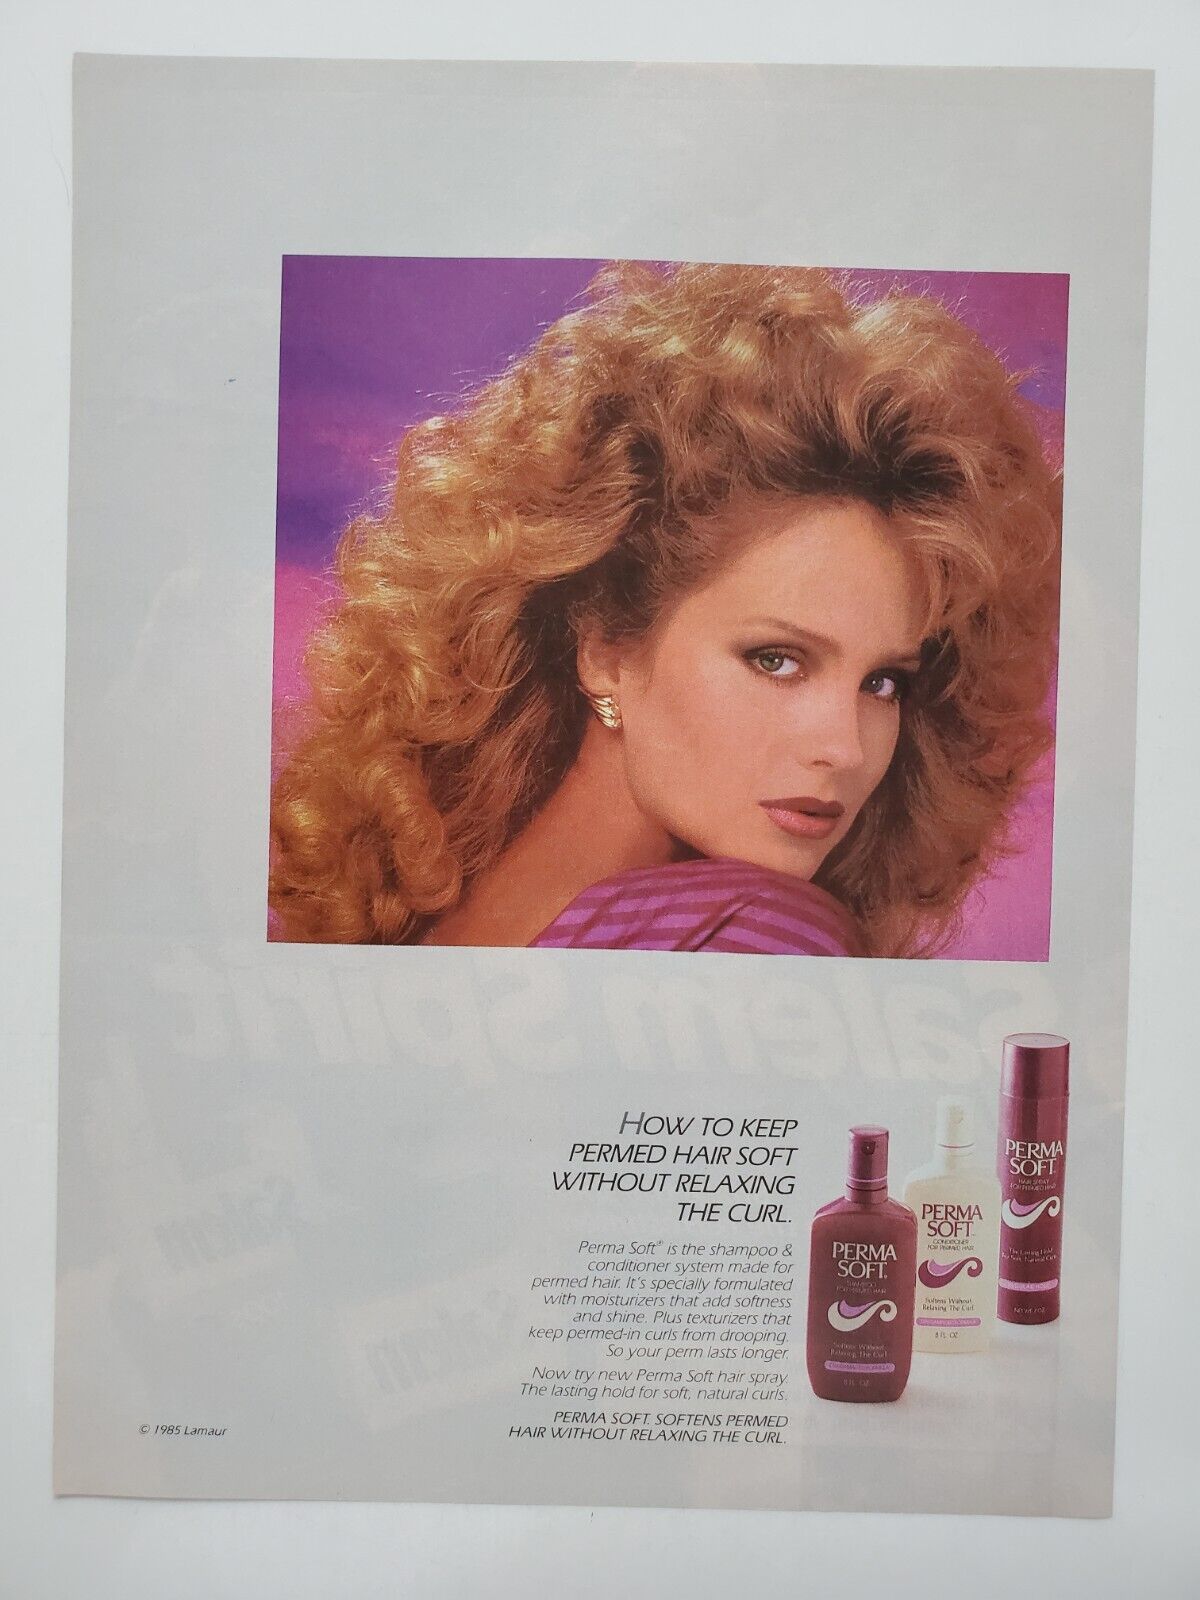 Perma Soft Womens Hair Care Products Beautiful Brunette 1986 Vintage Print Ad